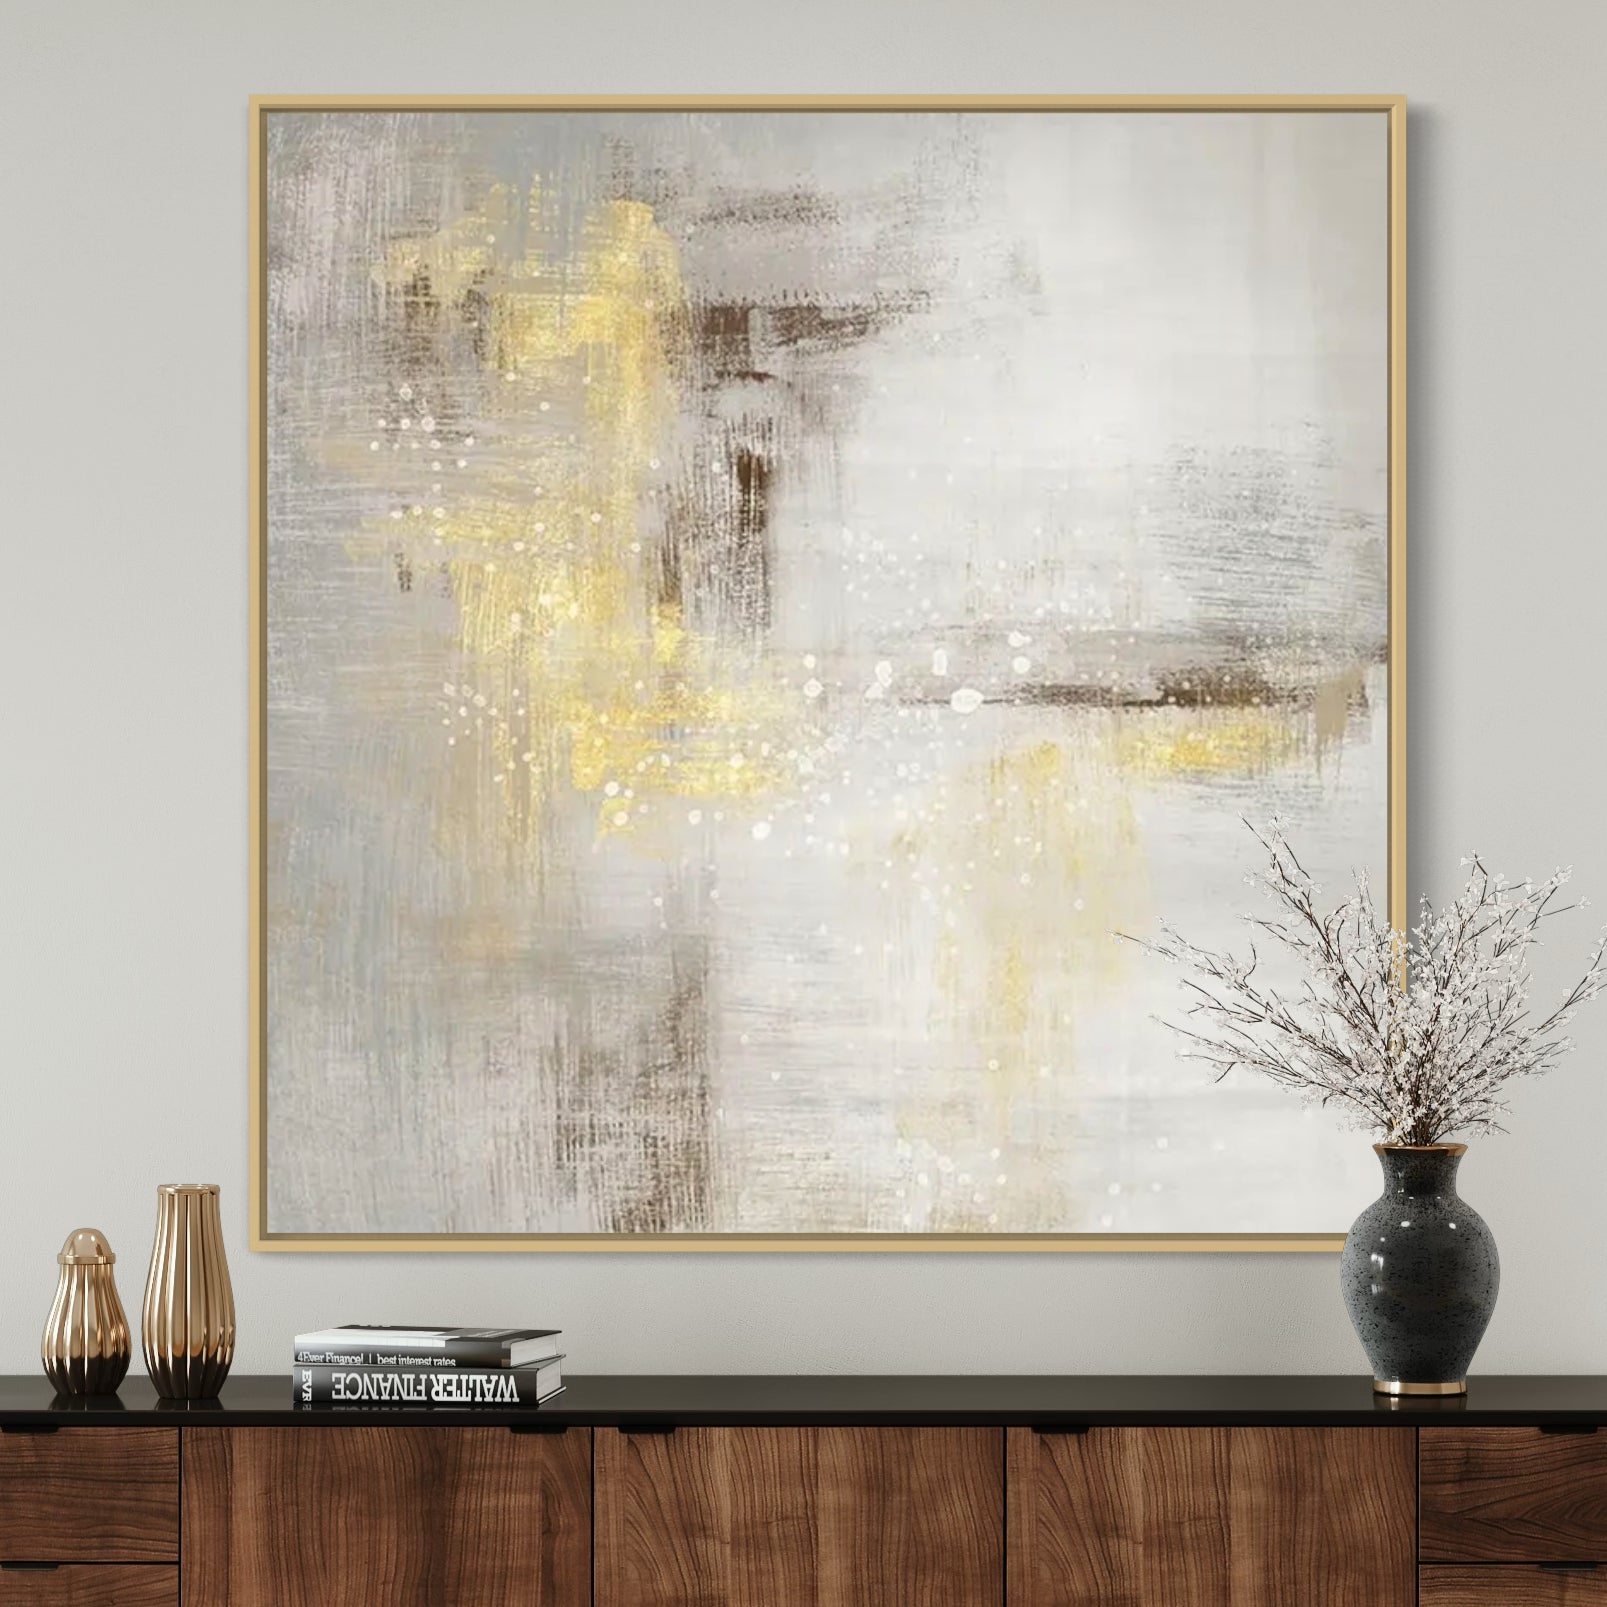 The World Of Light, Champagne / 80x80cm